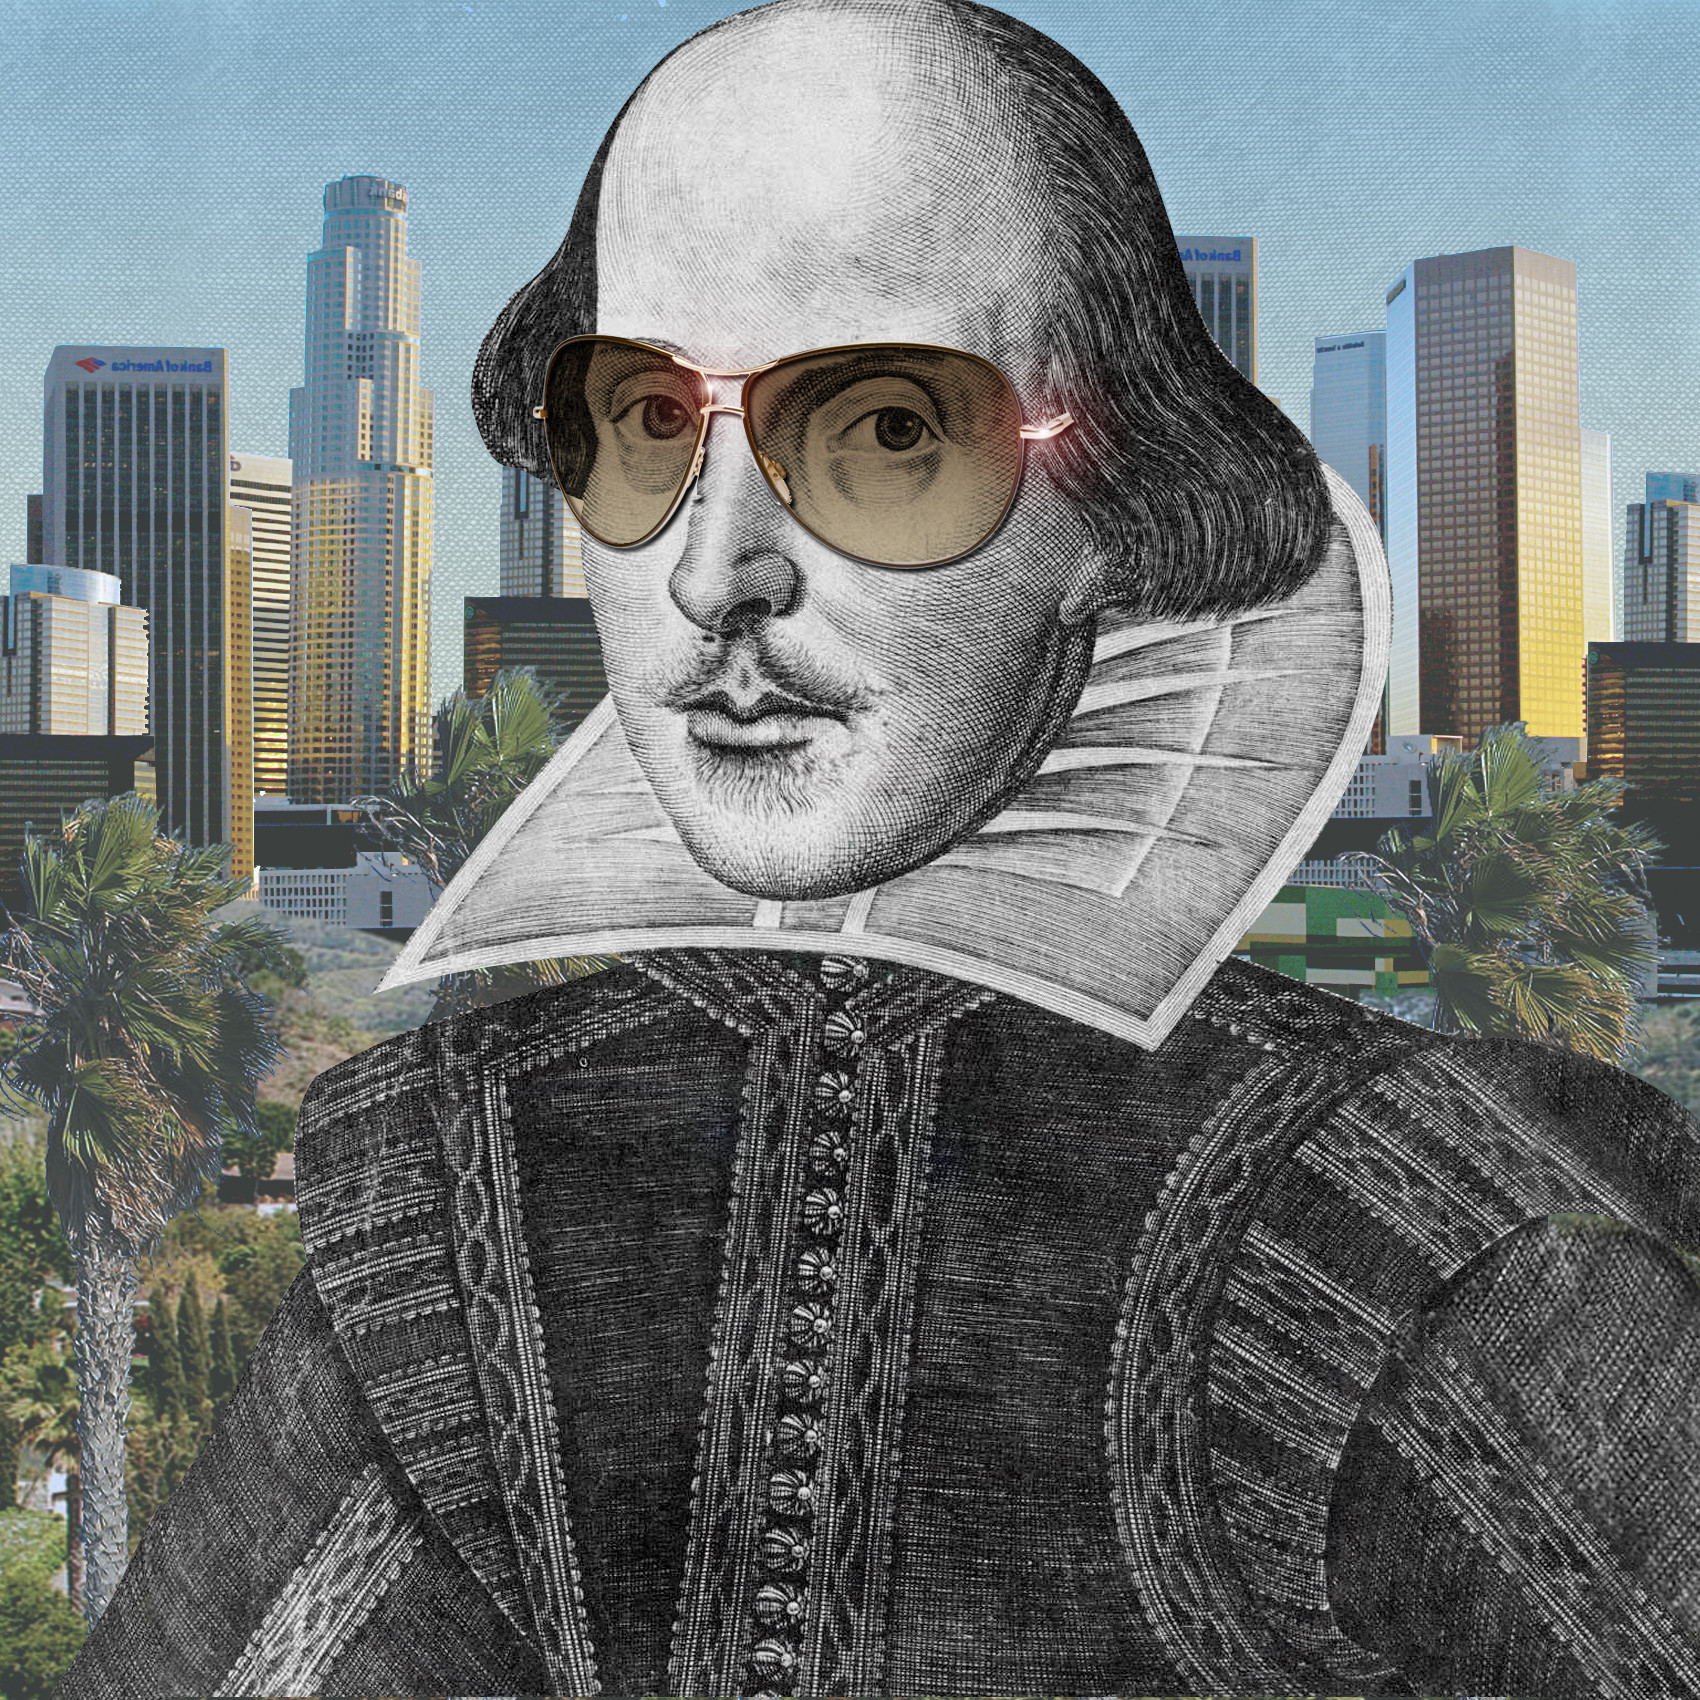 What is William Shakespeare's middle name?